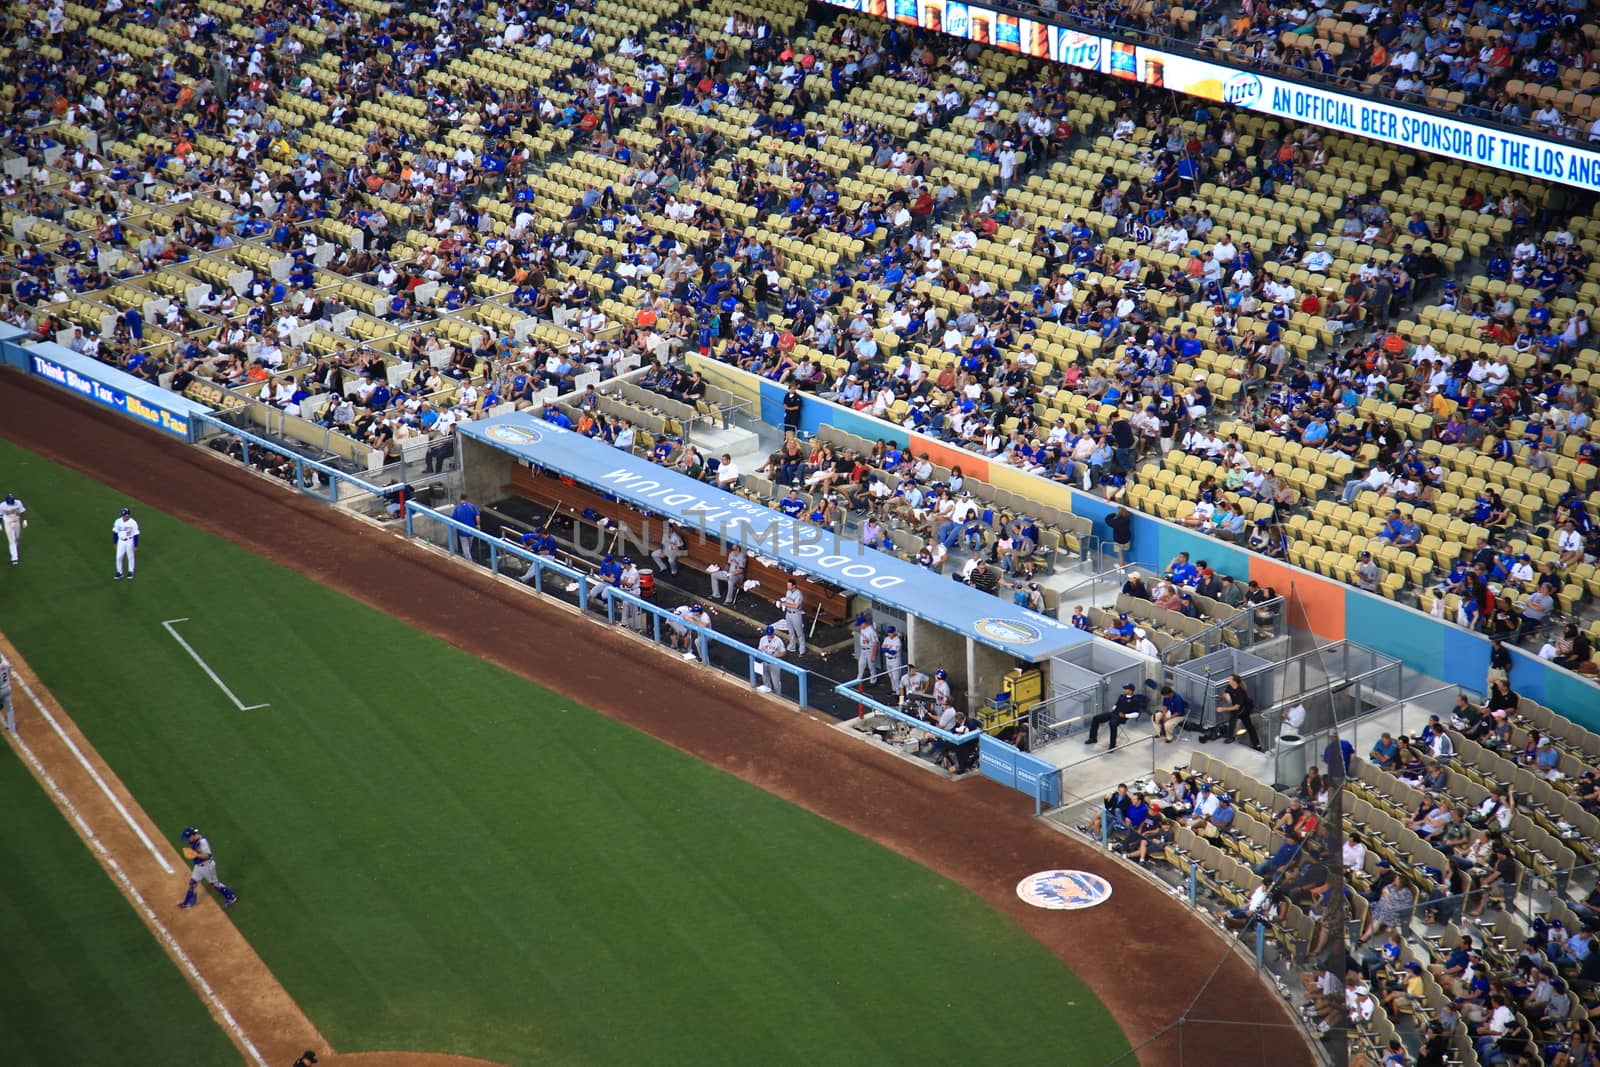 Dodger Stadium - Los Angeles Dodgers by Ffooter